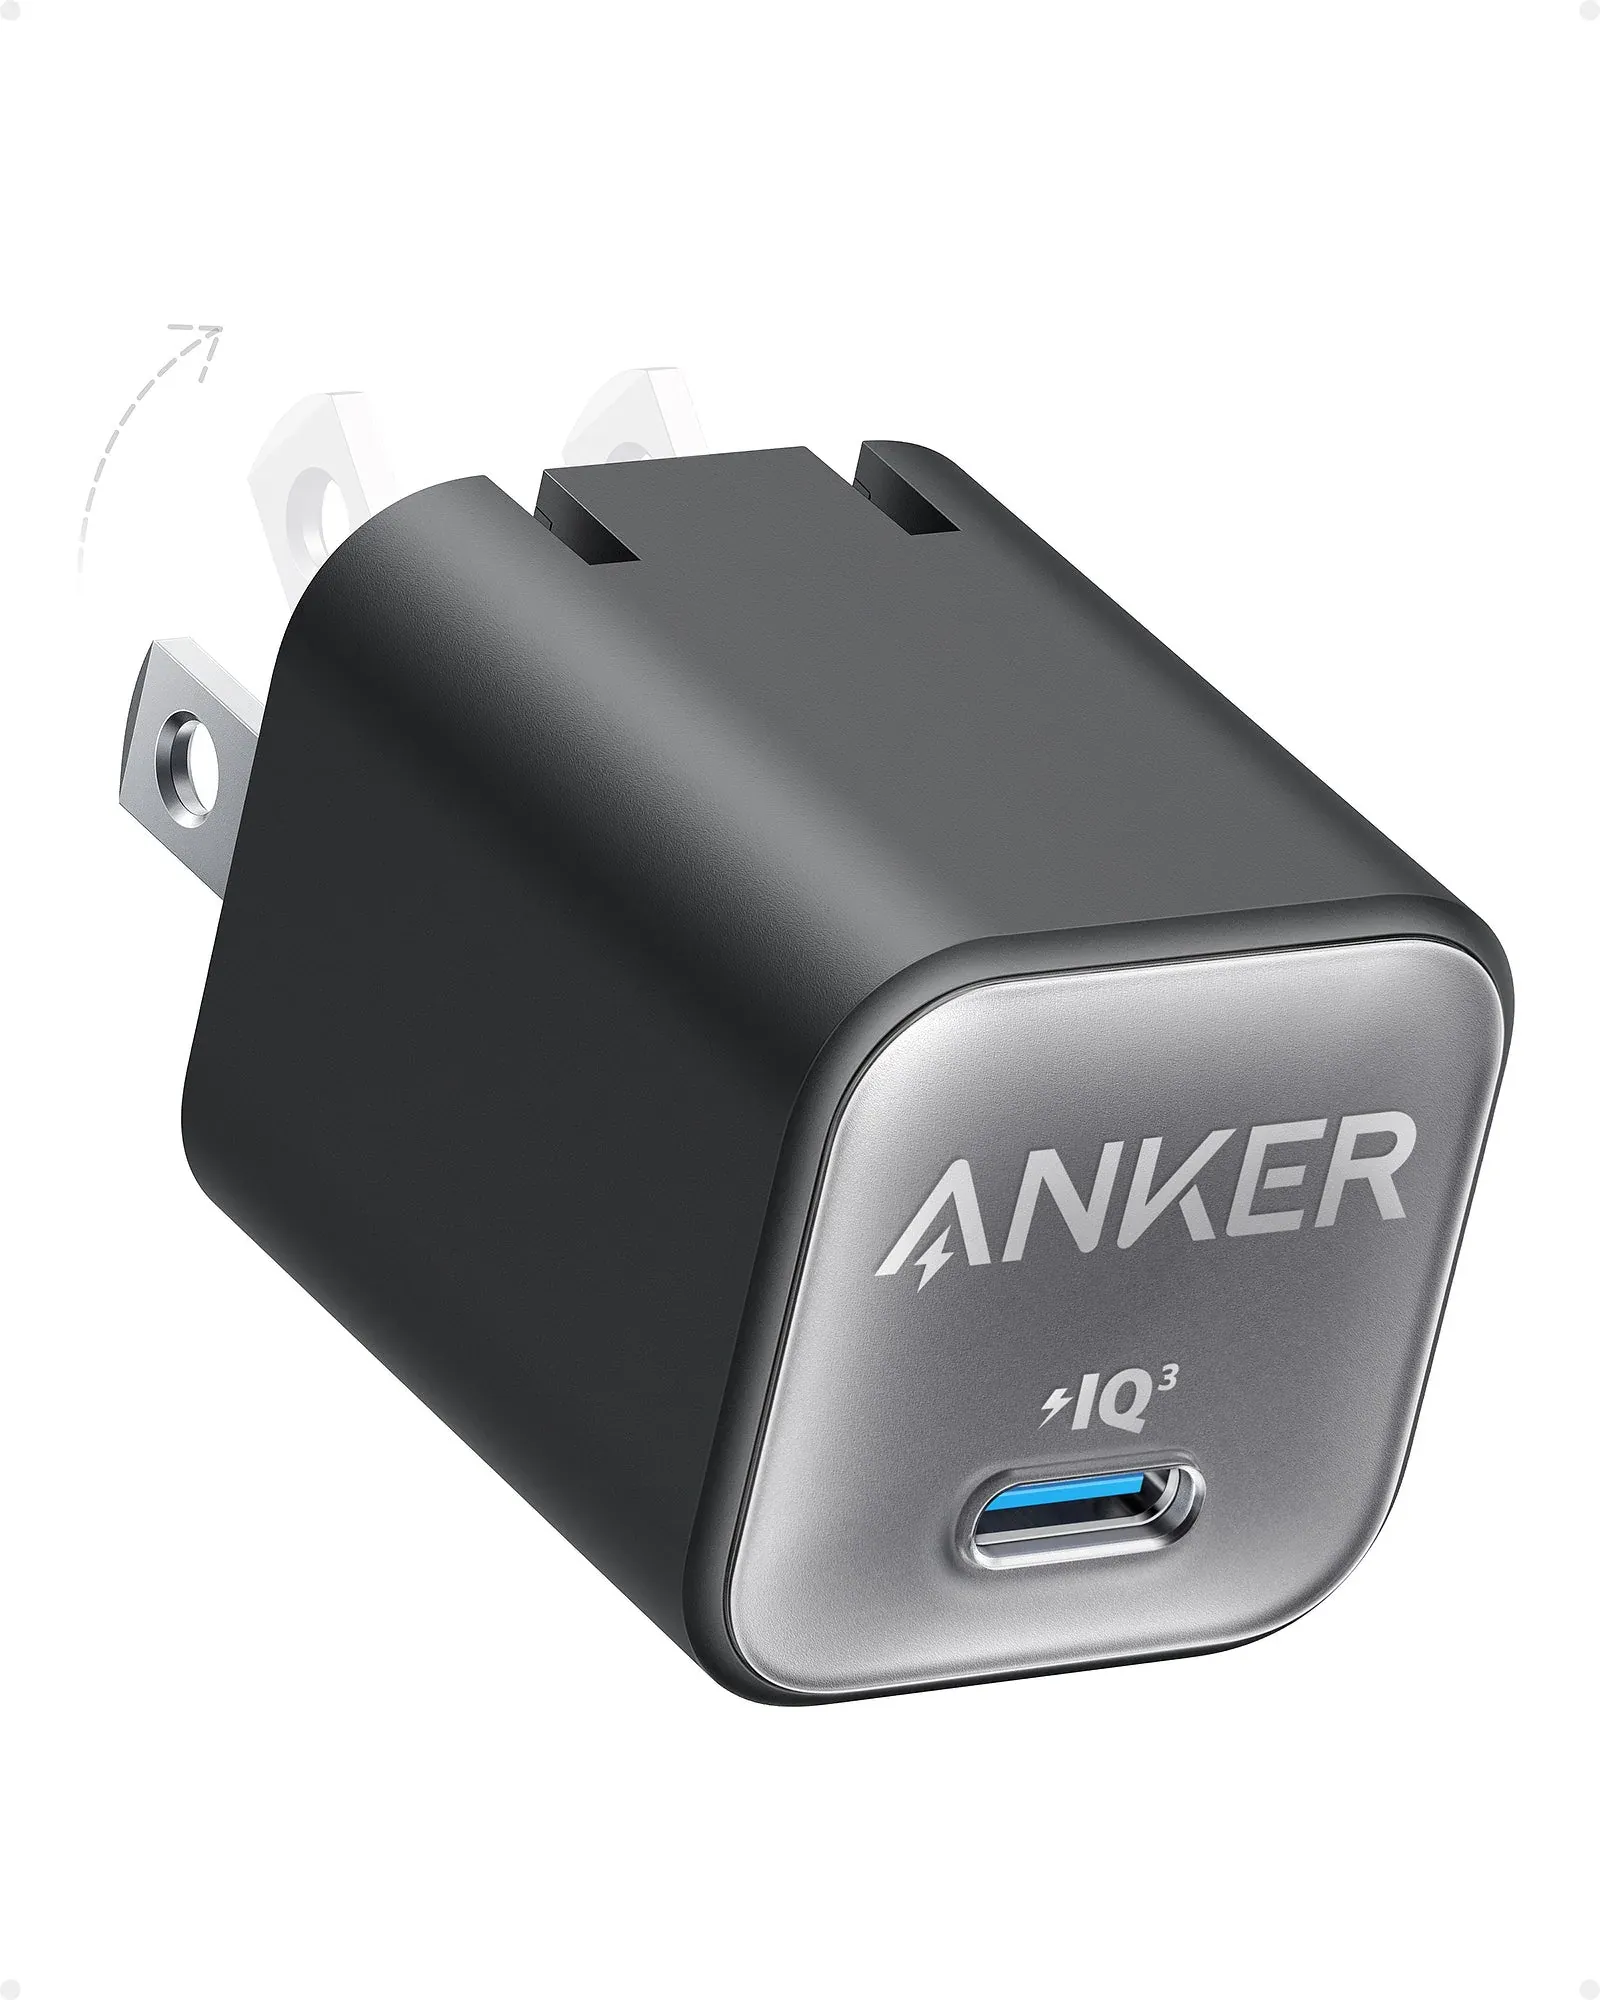 The Anker Nano 3 is one of the smallest GaN-based chargers on the market. It can deliver up to 30W of power to compatible devices and comes in five colorways. The company also offers a 24-month warrany on the charger.